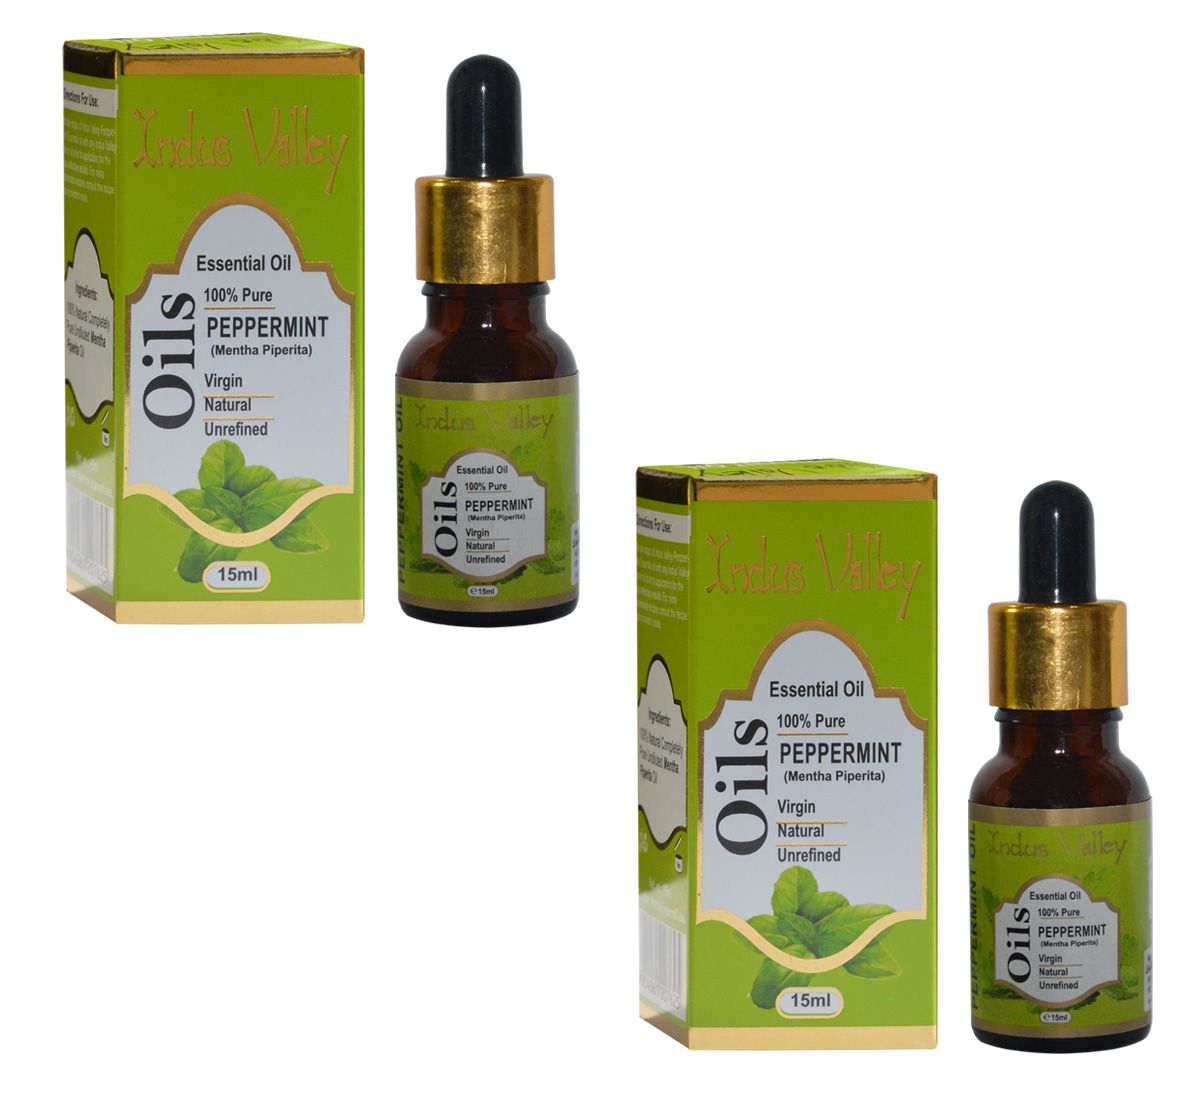     			Indus Valley Pure Virgin Peppermint Essential Oil - Twin Pack (30 ml)